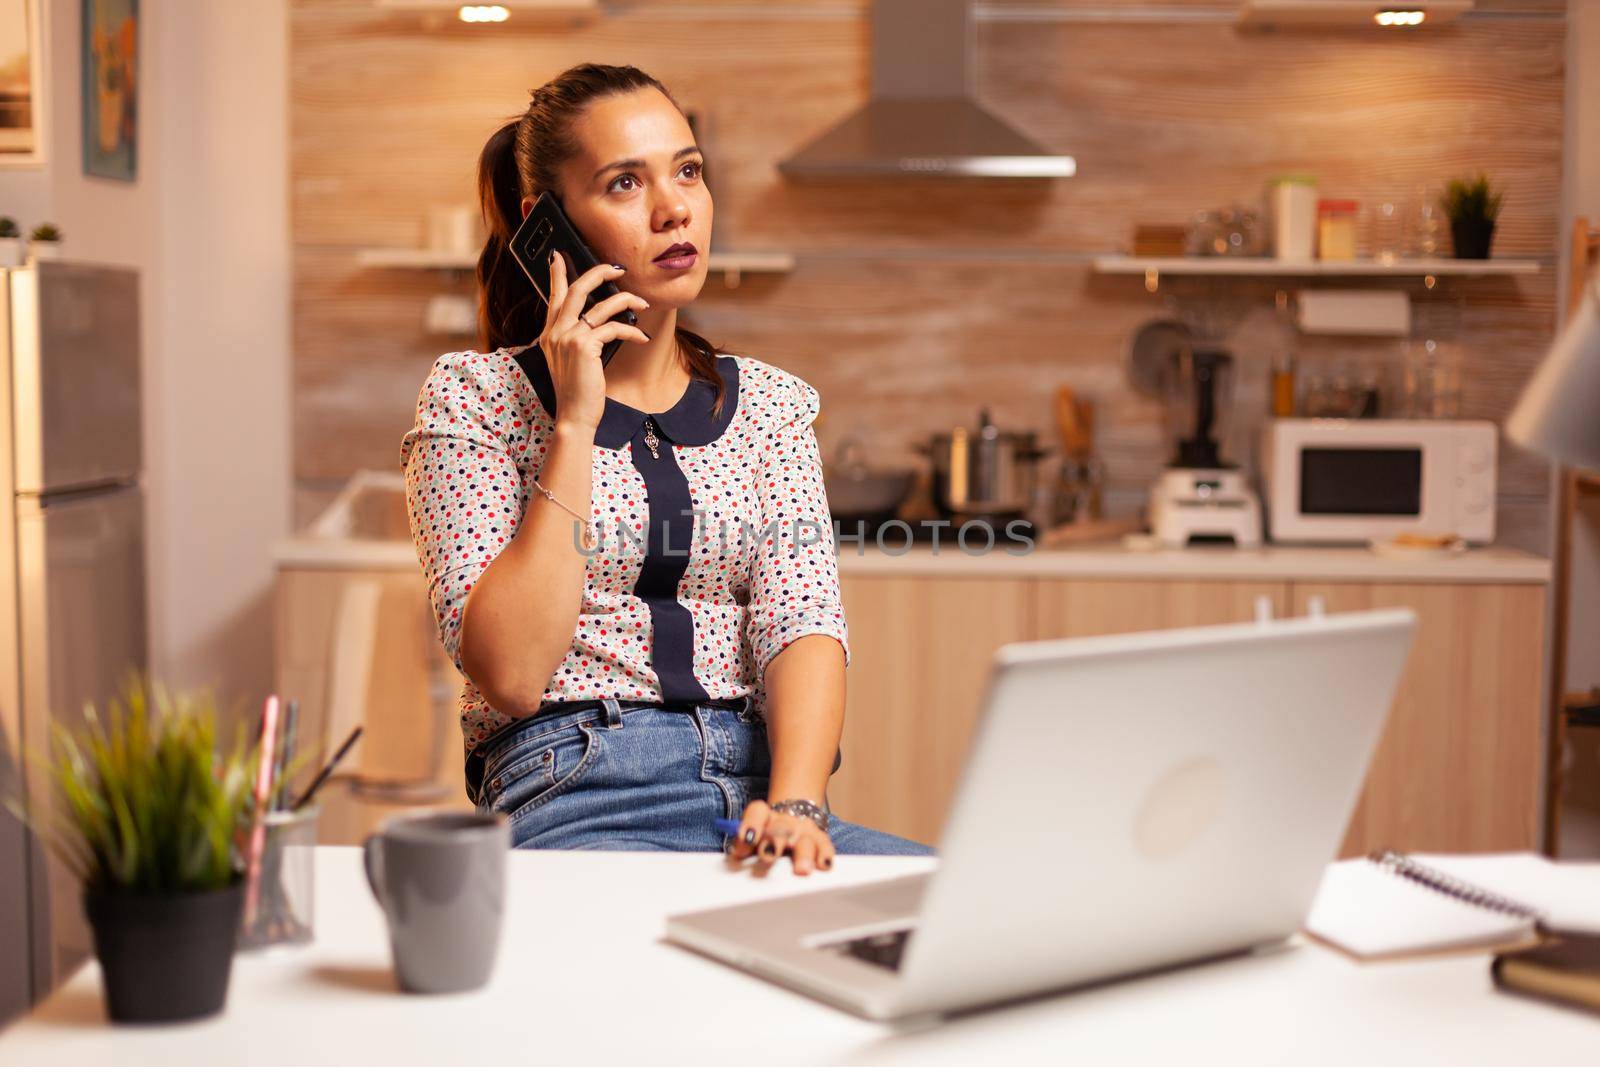 Concentrated businesswoman during phone call by DCStudio